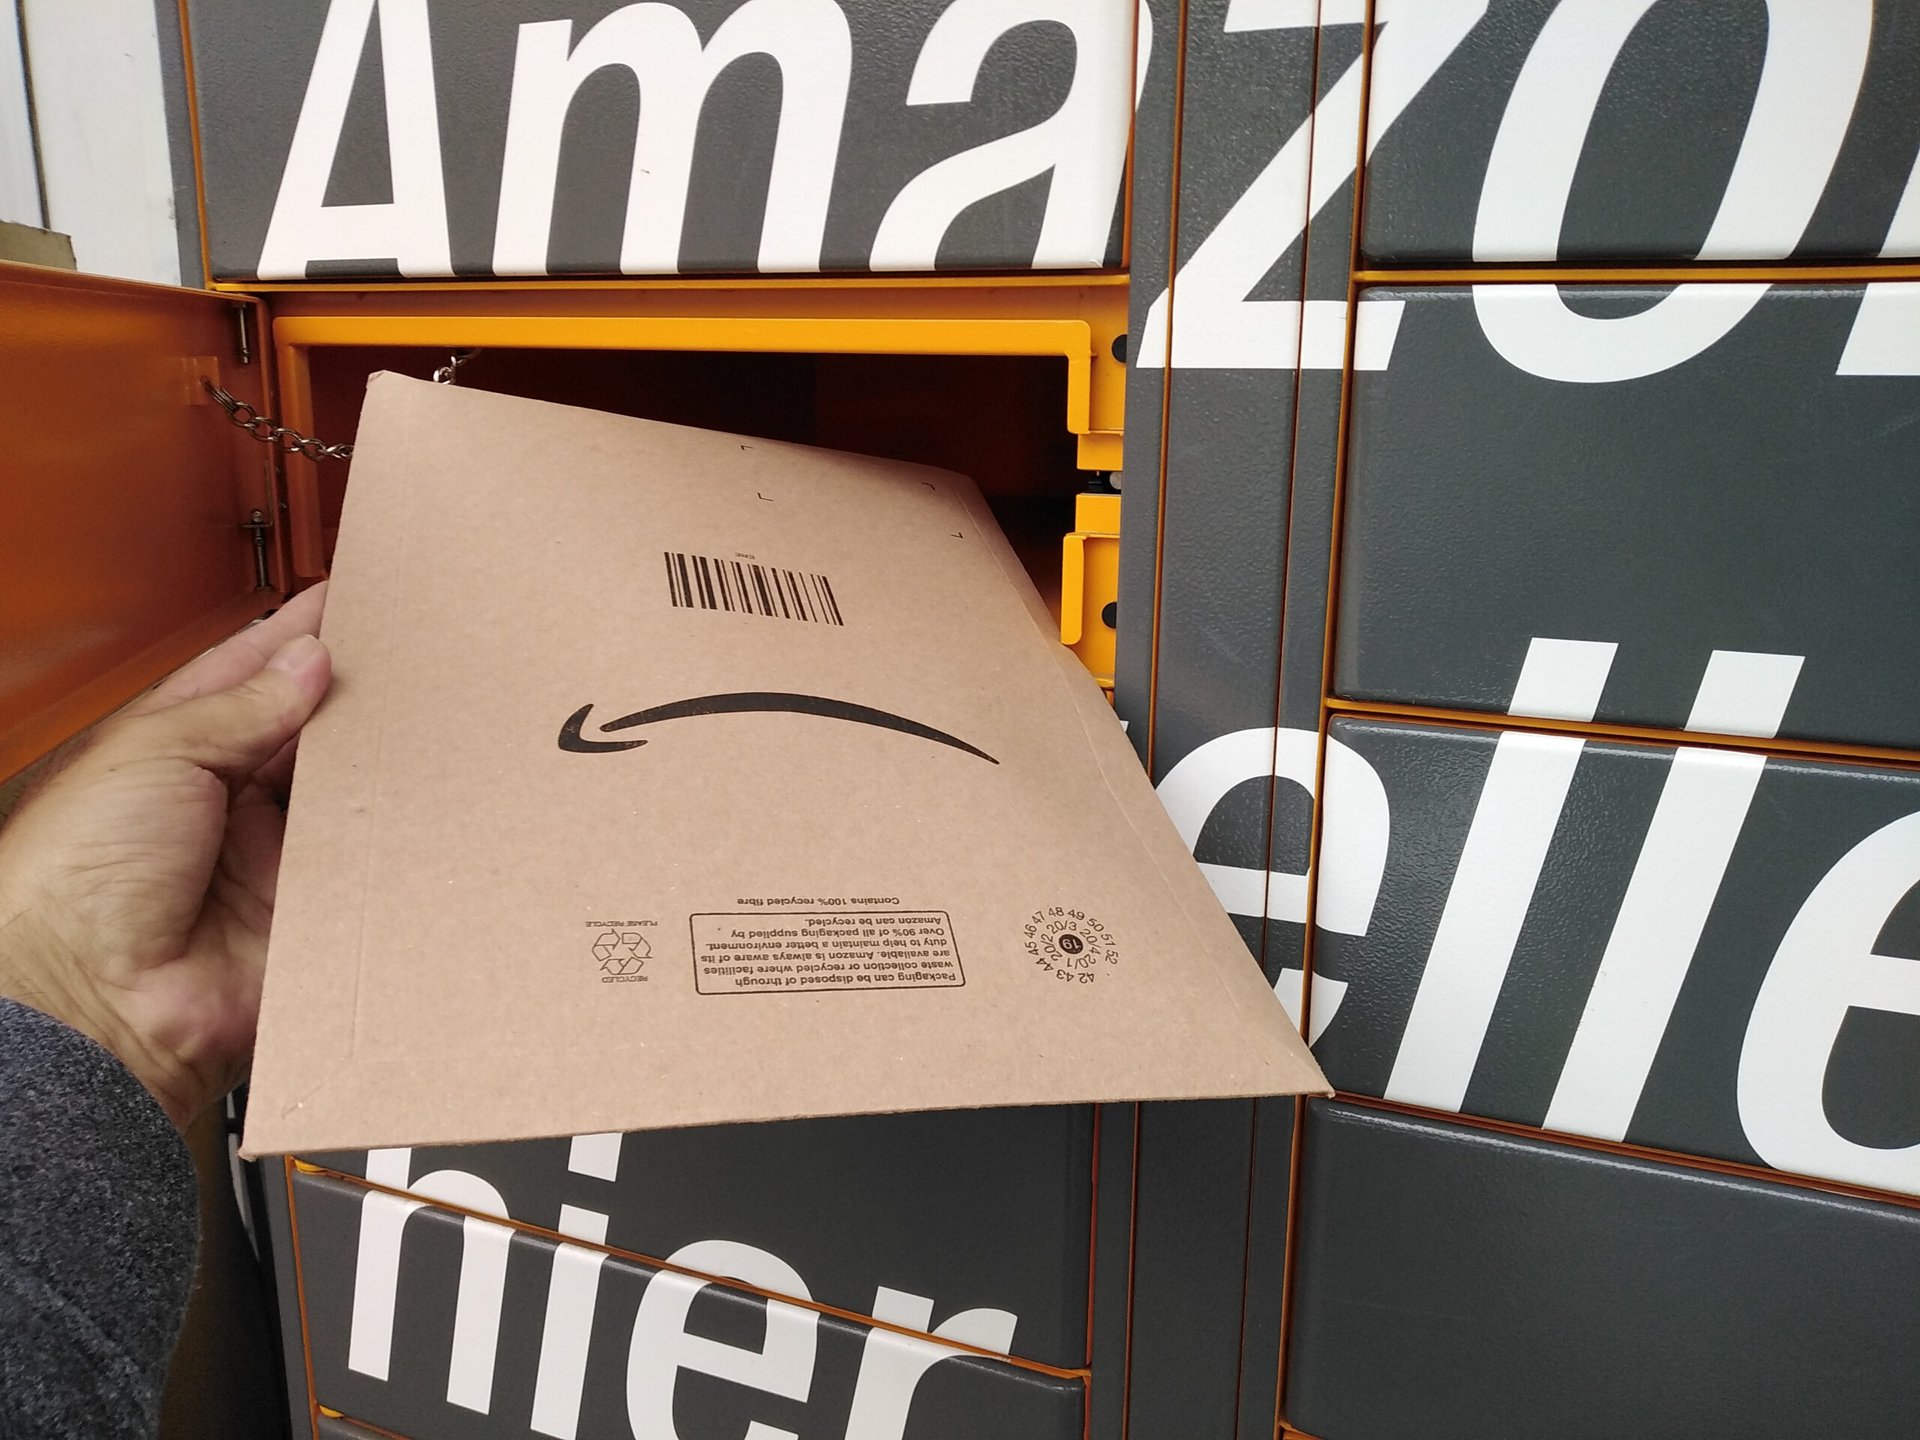 Amazon package being retrieved or returned to an Amazon locker with a frown